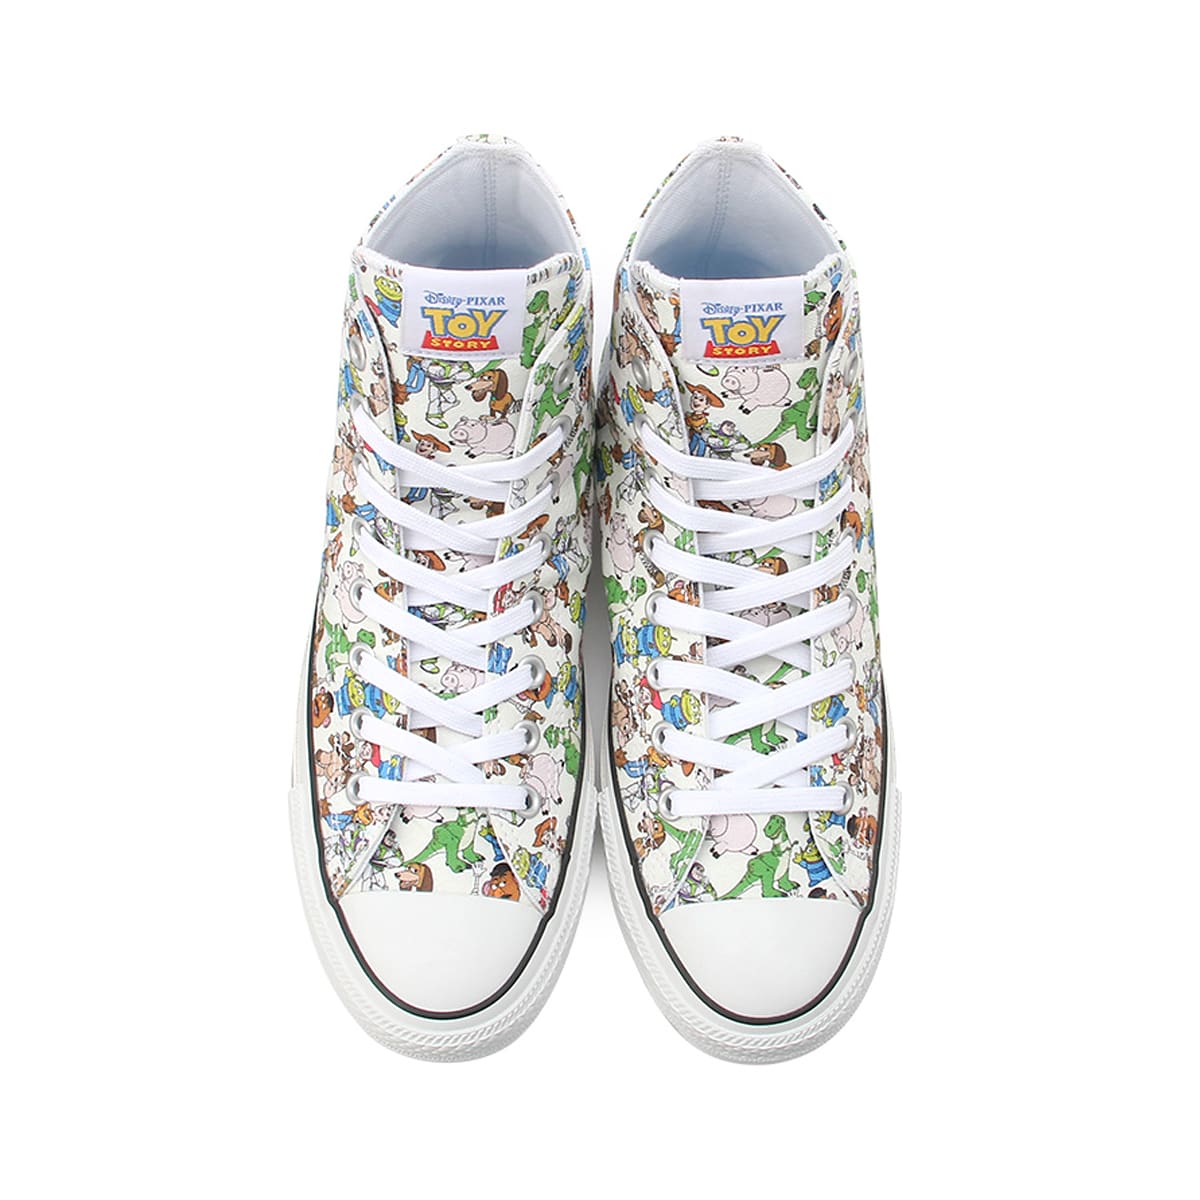 Toy Story x Converse Chuck Taylor All Star 329616600 3